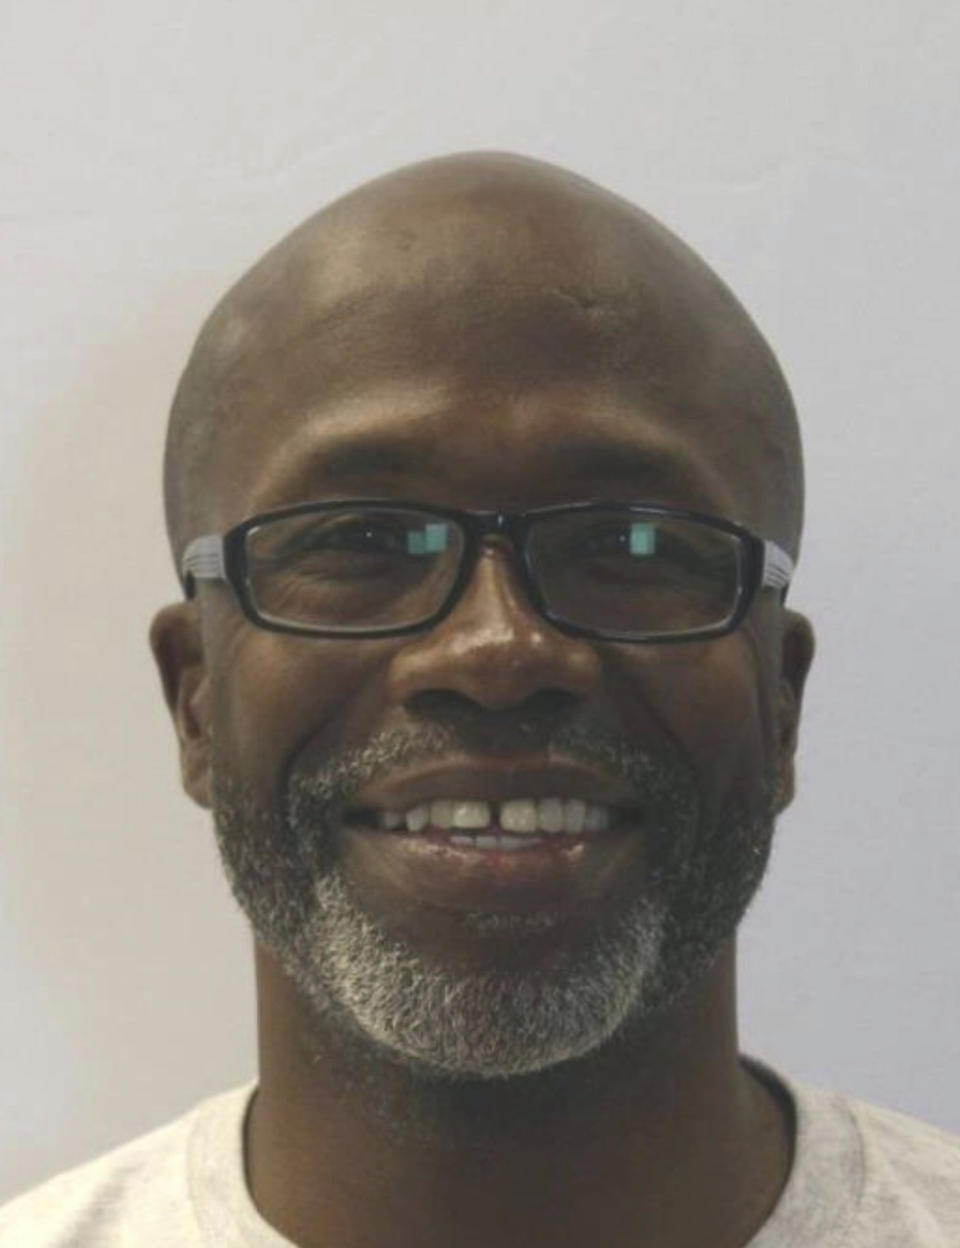 Keith Smith is shown in an undated photo provided by the Baltimore Police Department. On March 3, 2019 the Baltimore Police Department announced the apprehension and arrest of Keith Smith of Baltimore, and Valeria Shavon Smith, in the December 1, 2018 murder of Jacquelyn Anne Smith. Keith Smith was Jacquelyn Anne Smith’s husband and Valeria Smith was her step-daughter. (Baltimore Police Department via AP)